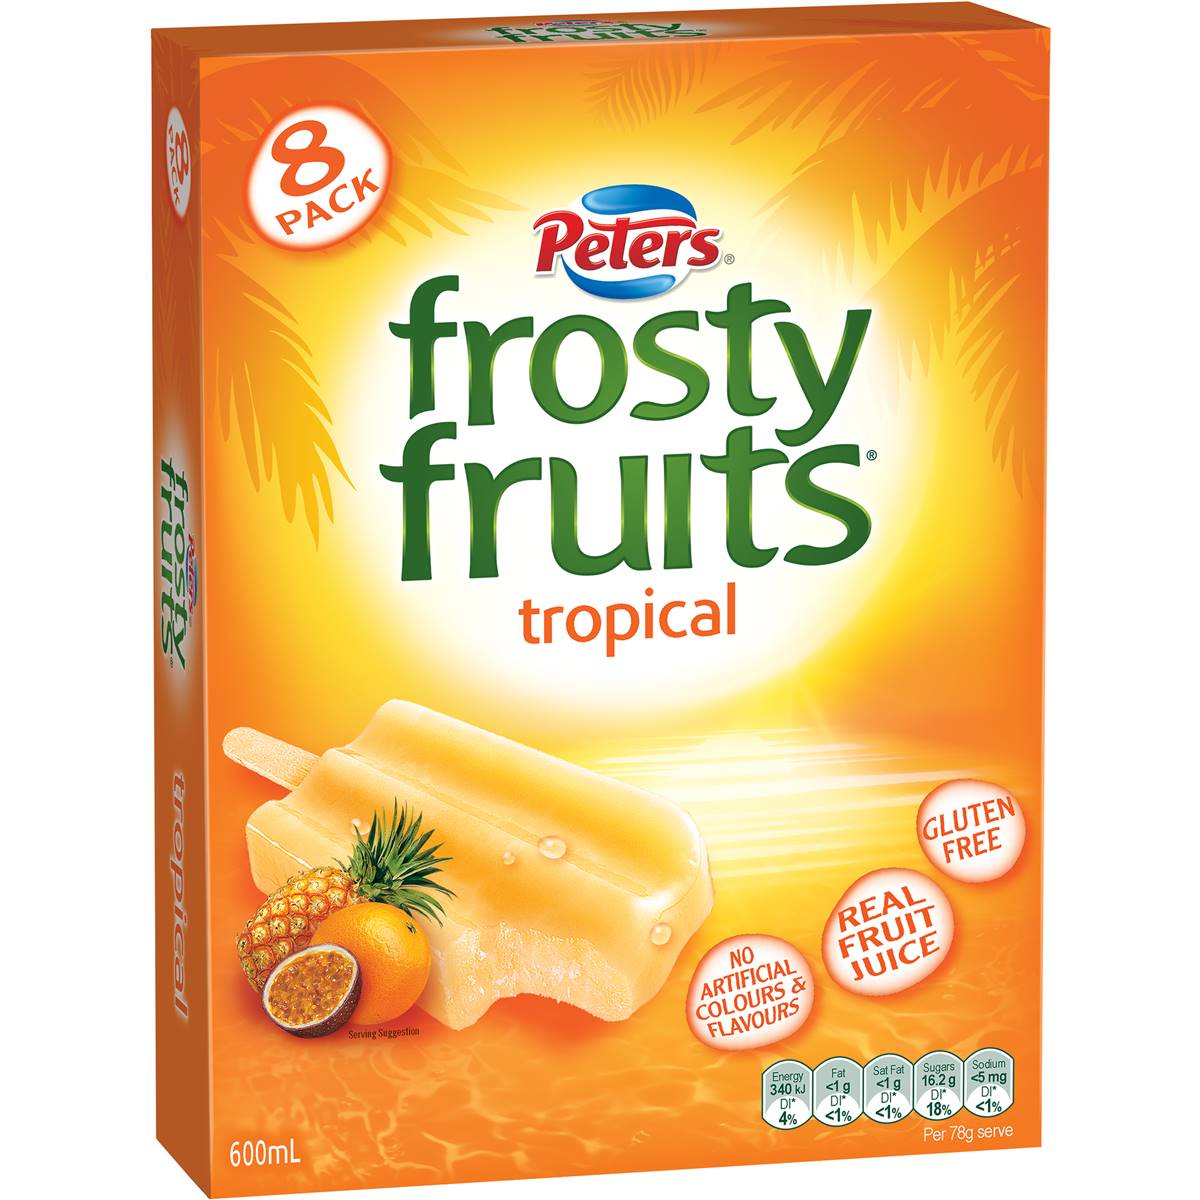 Peters Frosty Fruits Tropical 8pk